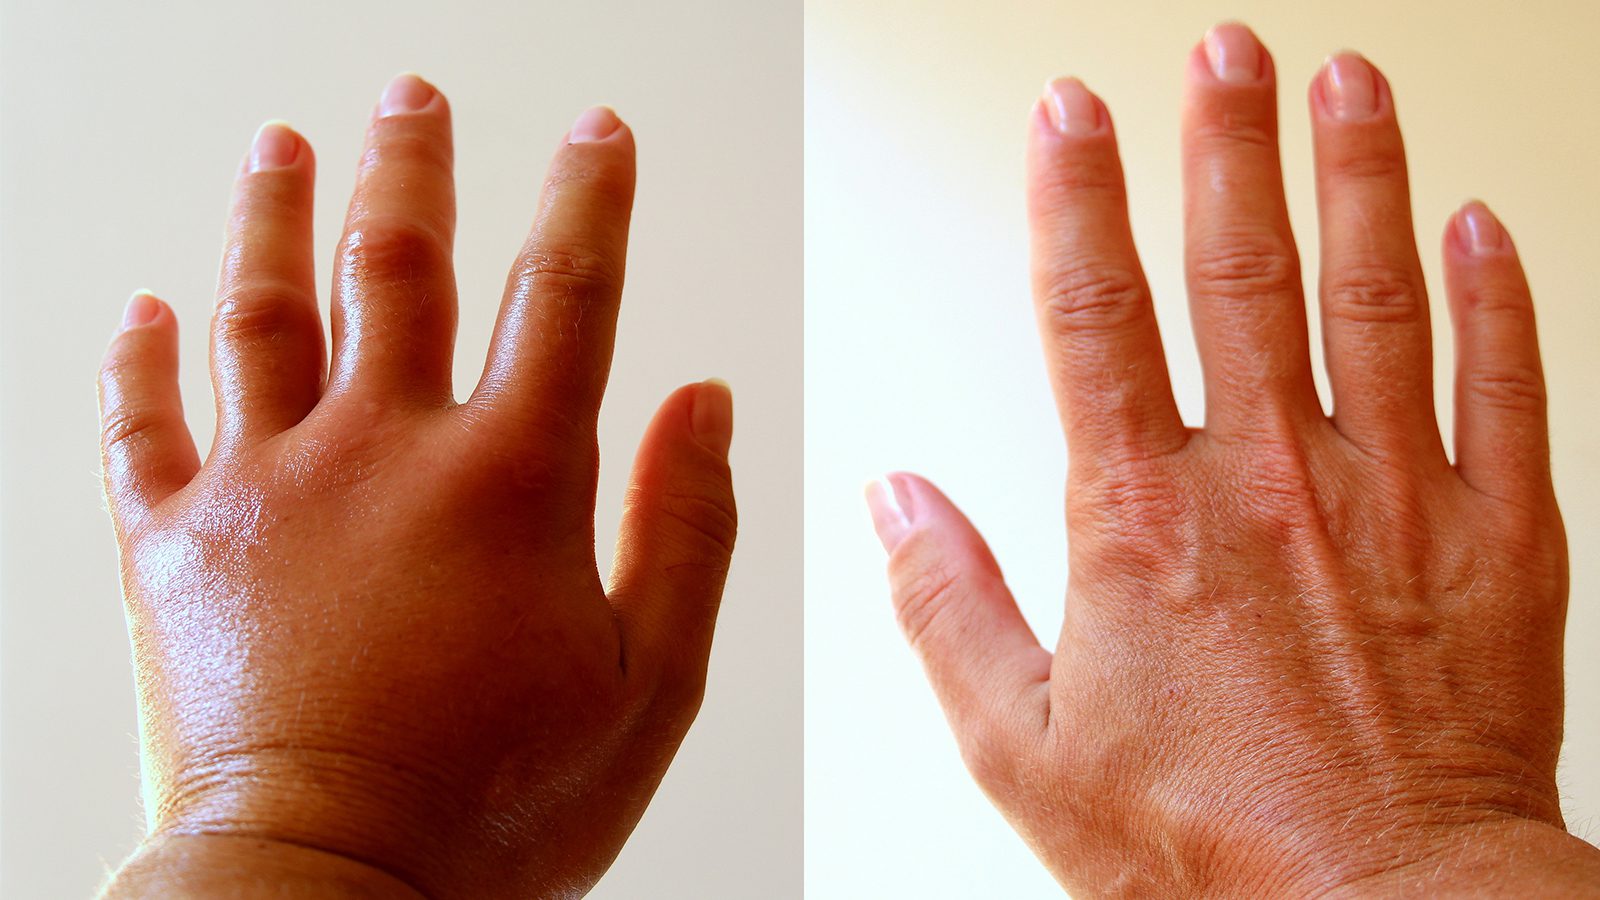 Doctors Explain What Swollen Hands Reveal About Your Health